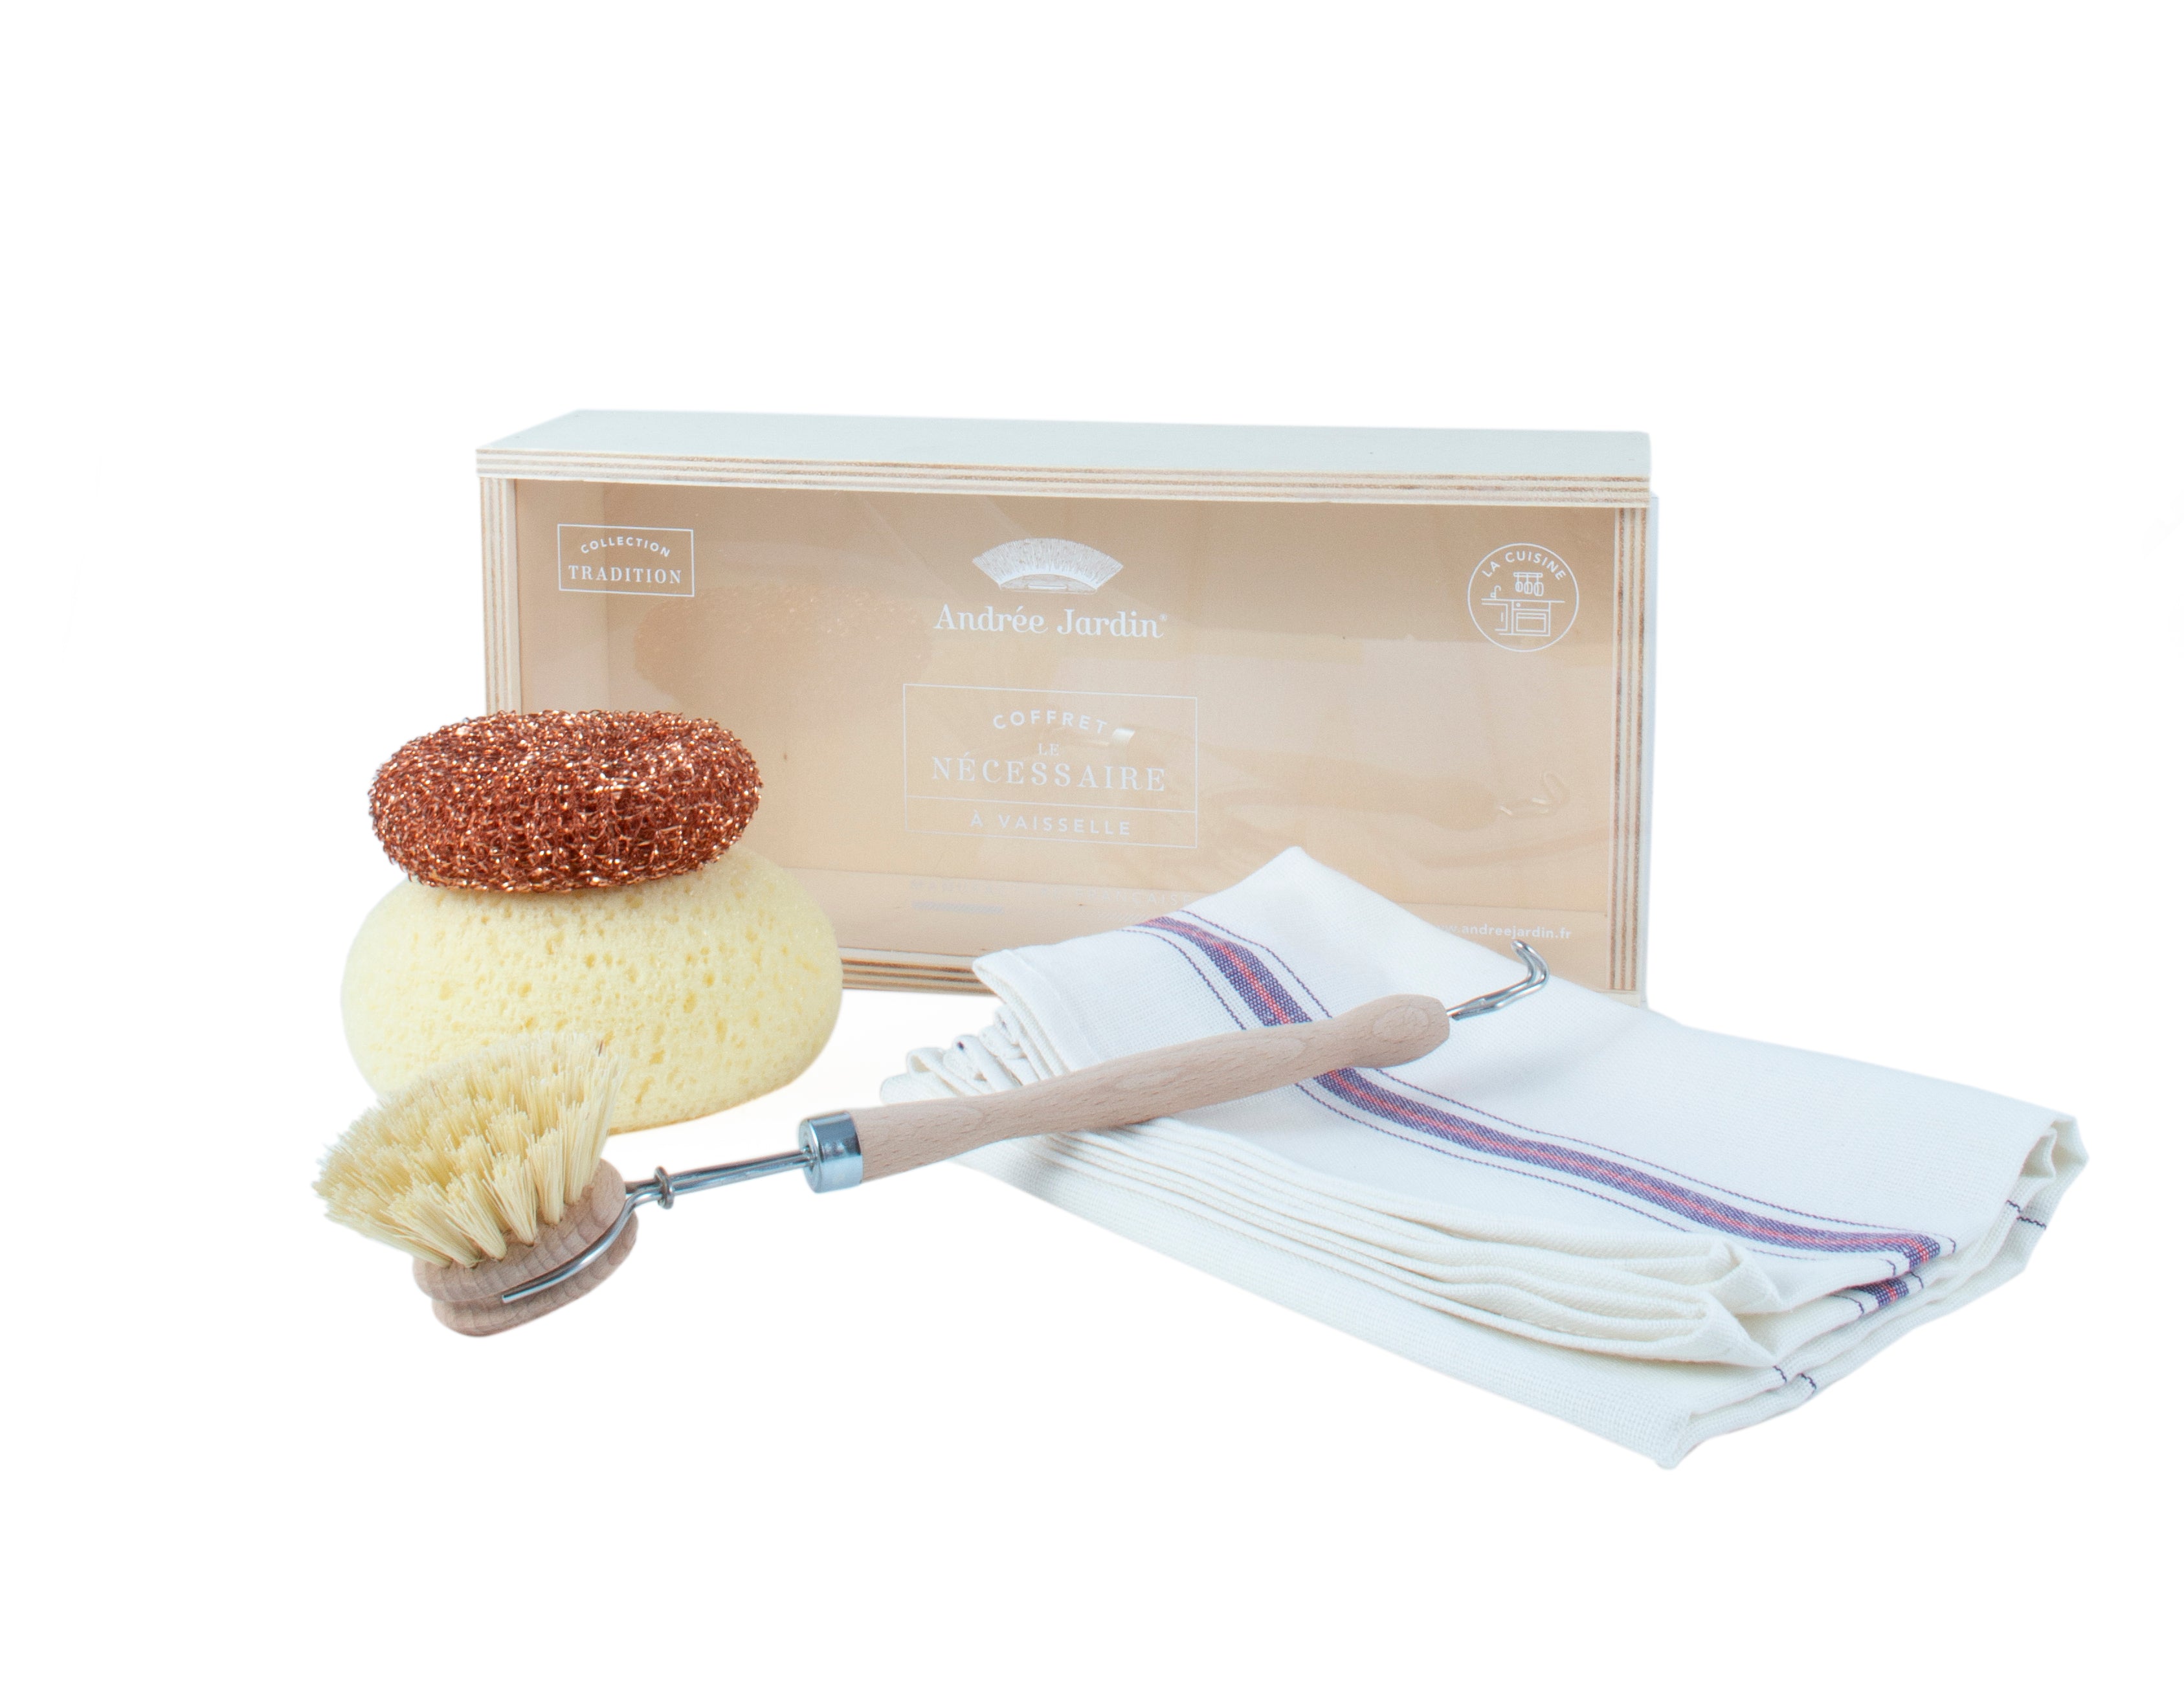 Andrée Jardin "Tradition" Dish Kit in Wooden Box Andrée Jardin Andrée Jardin Back in stock Brand_Andrée Jardin Home_Household Cleaning Kitchen_Accessories Kitchen_Kitchenware La Cuisine AndreeJardinNewDishKit_Out